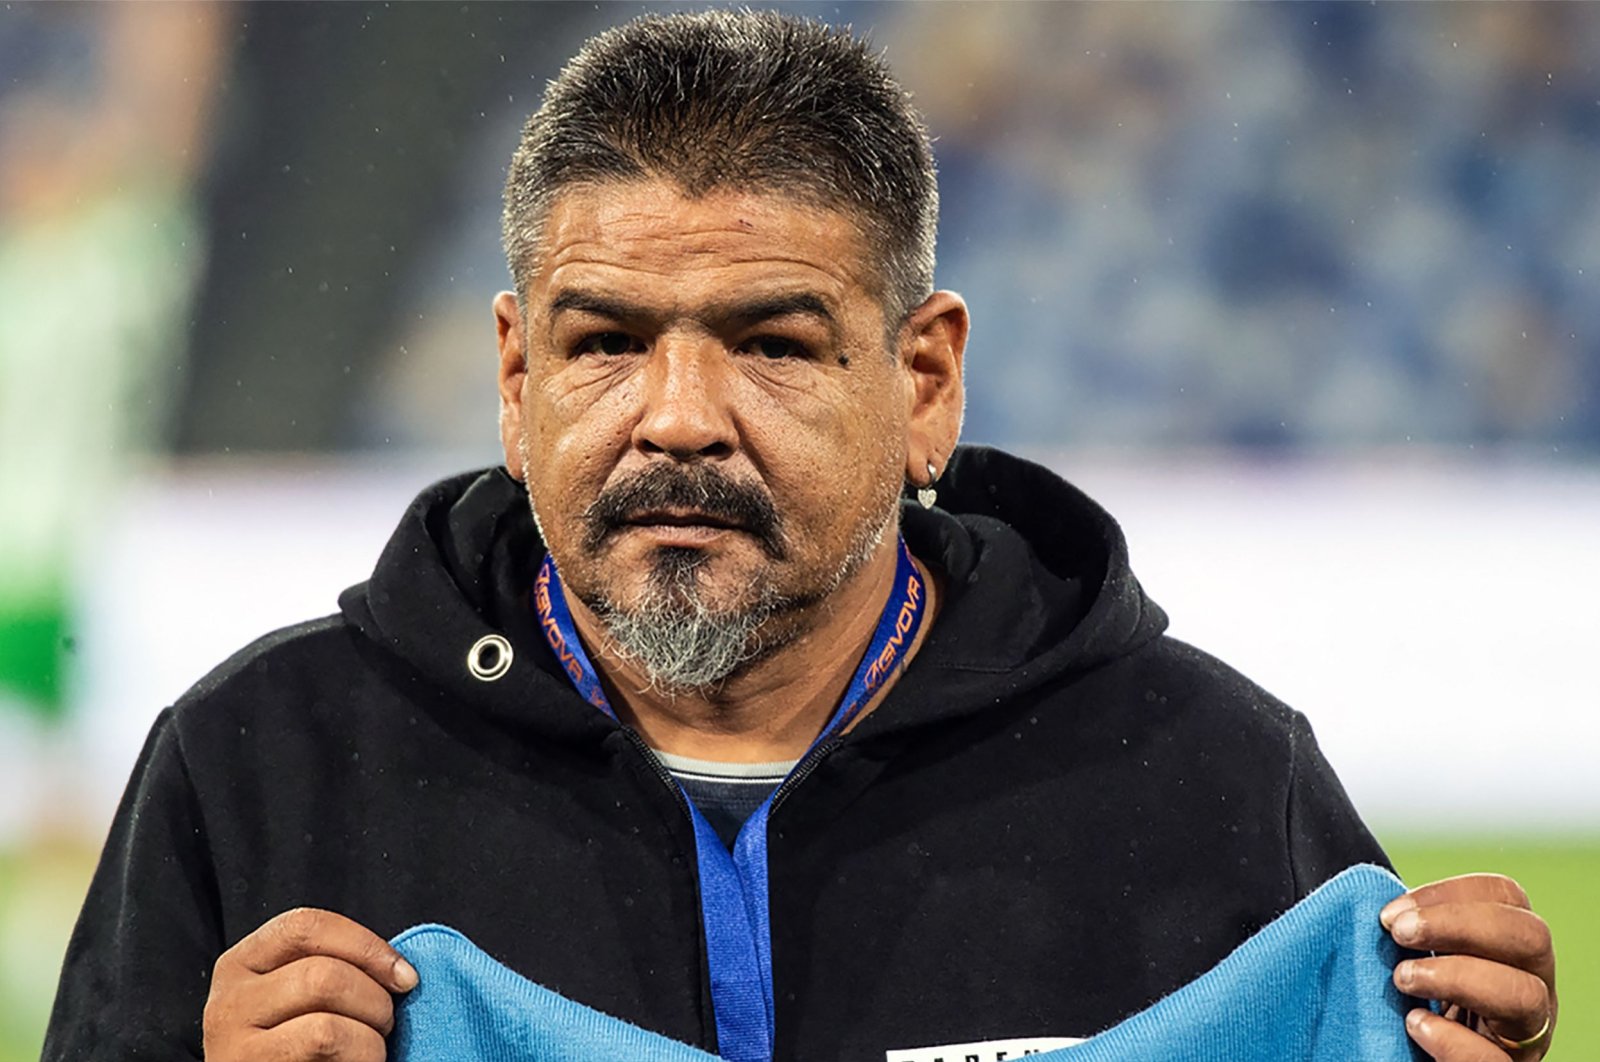 Hugo Maradona, the younger brother of late Argentine football legend Diego Maradona, is seen in this undated photo during a recent football match, Naples, Italy.